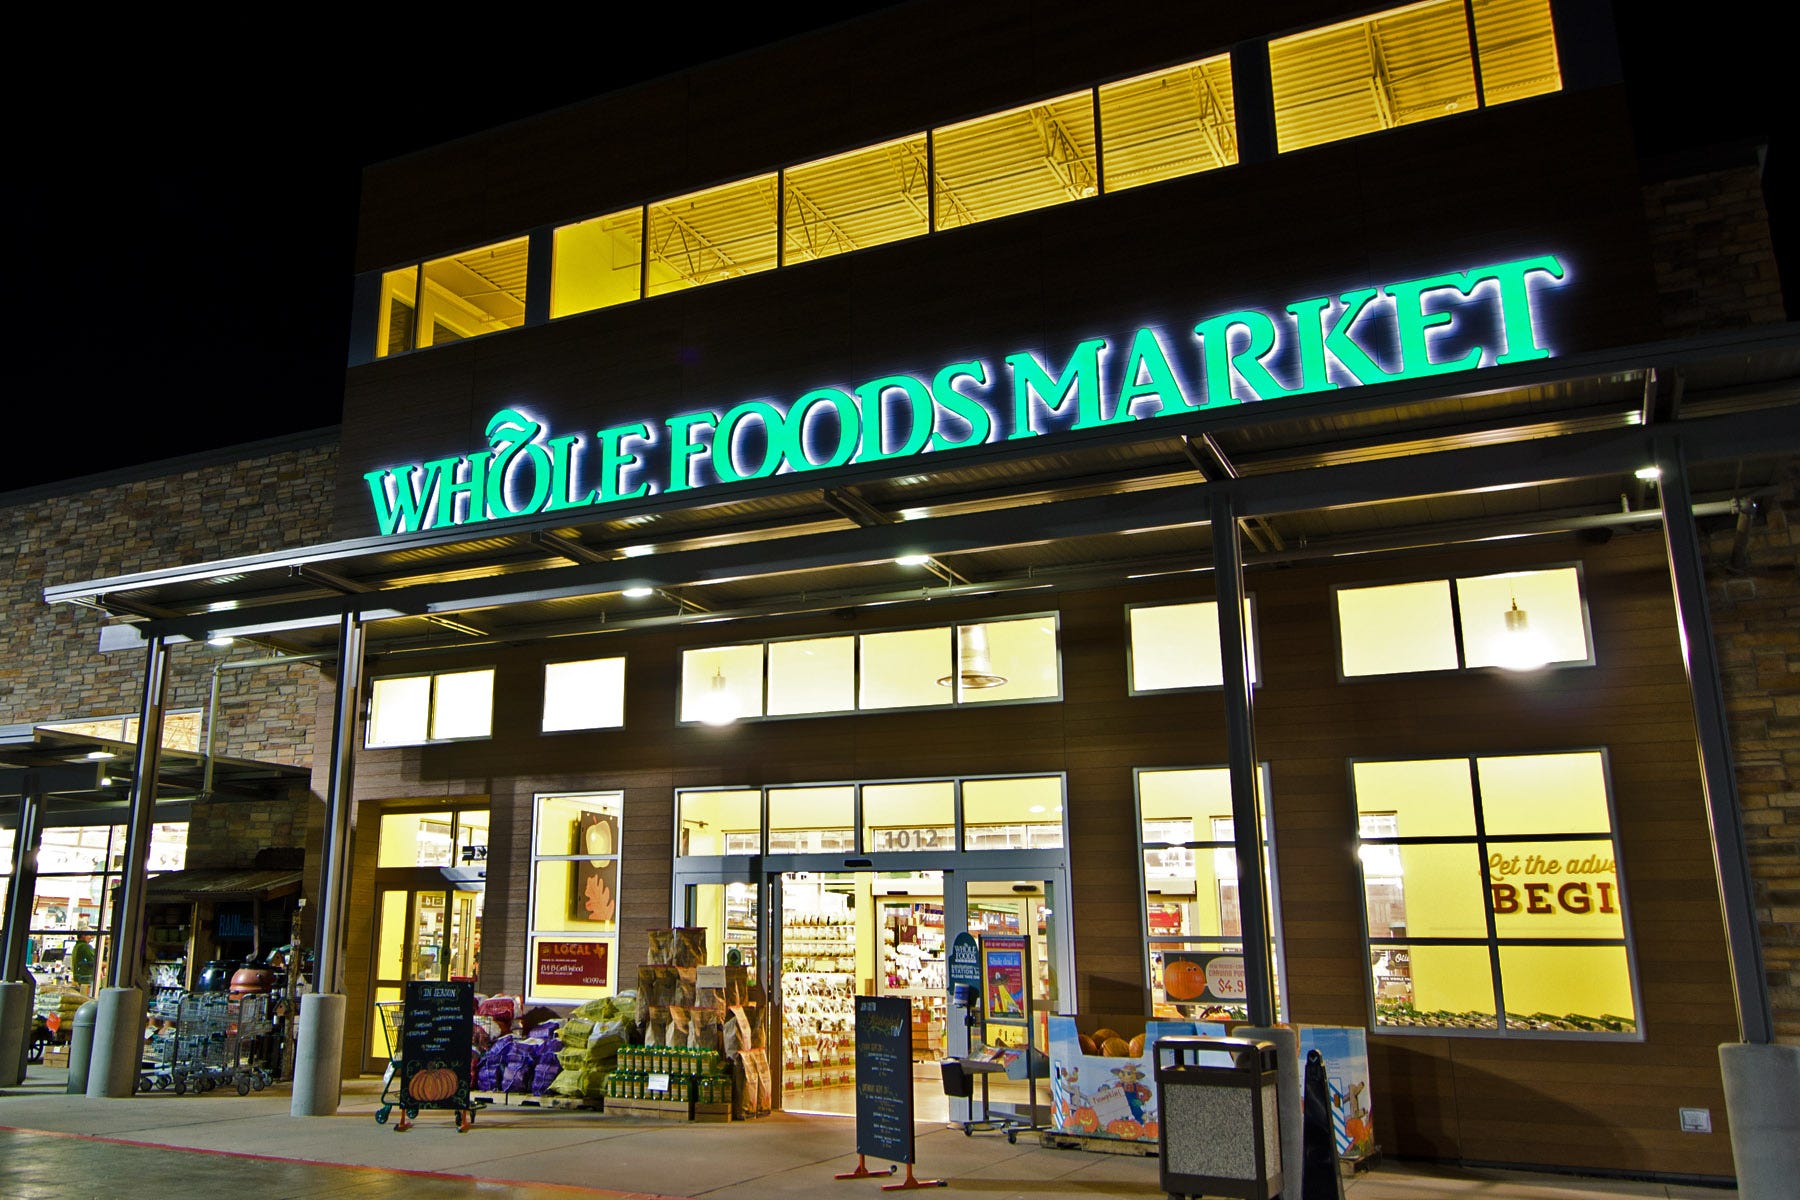 Amazon's Whole Foods to cut health benefits for part-time workers